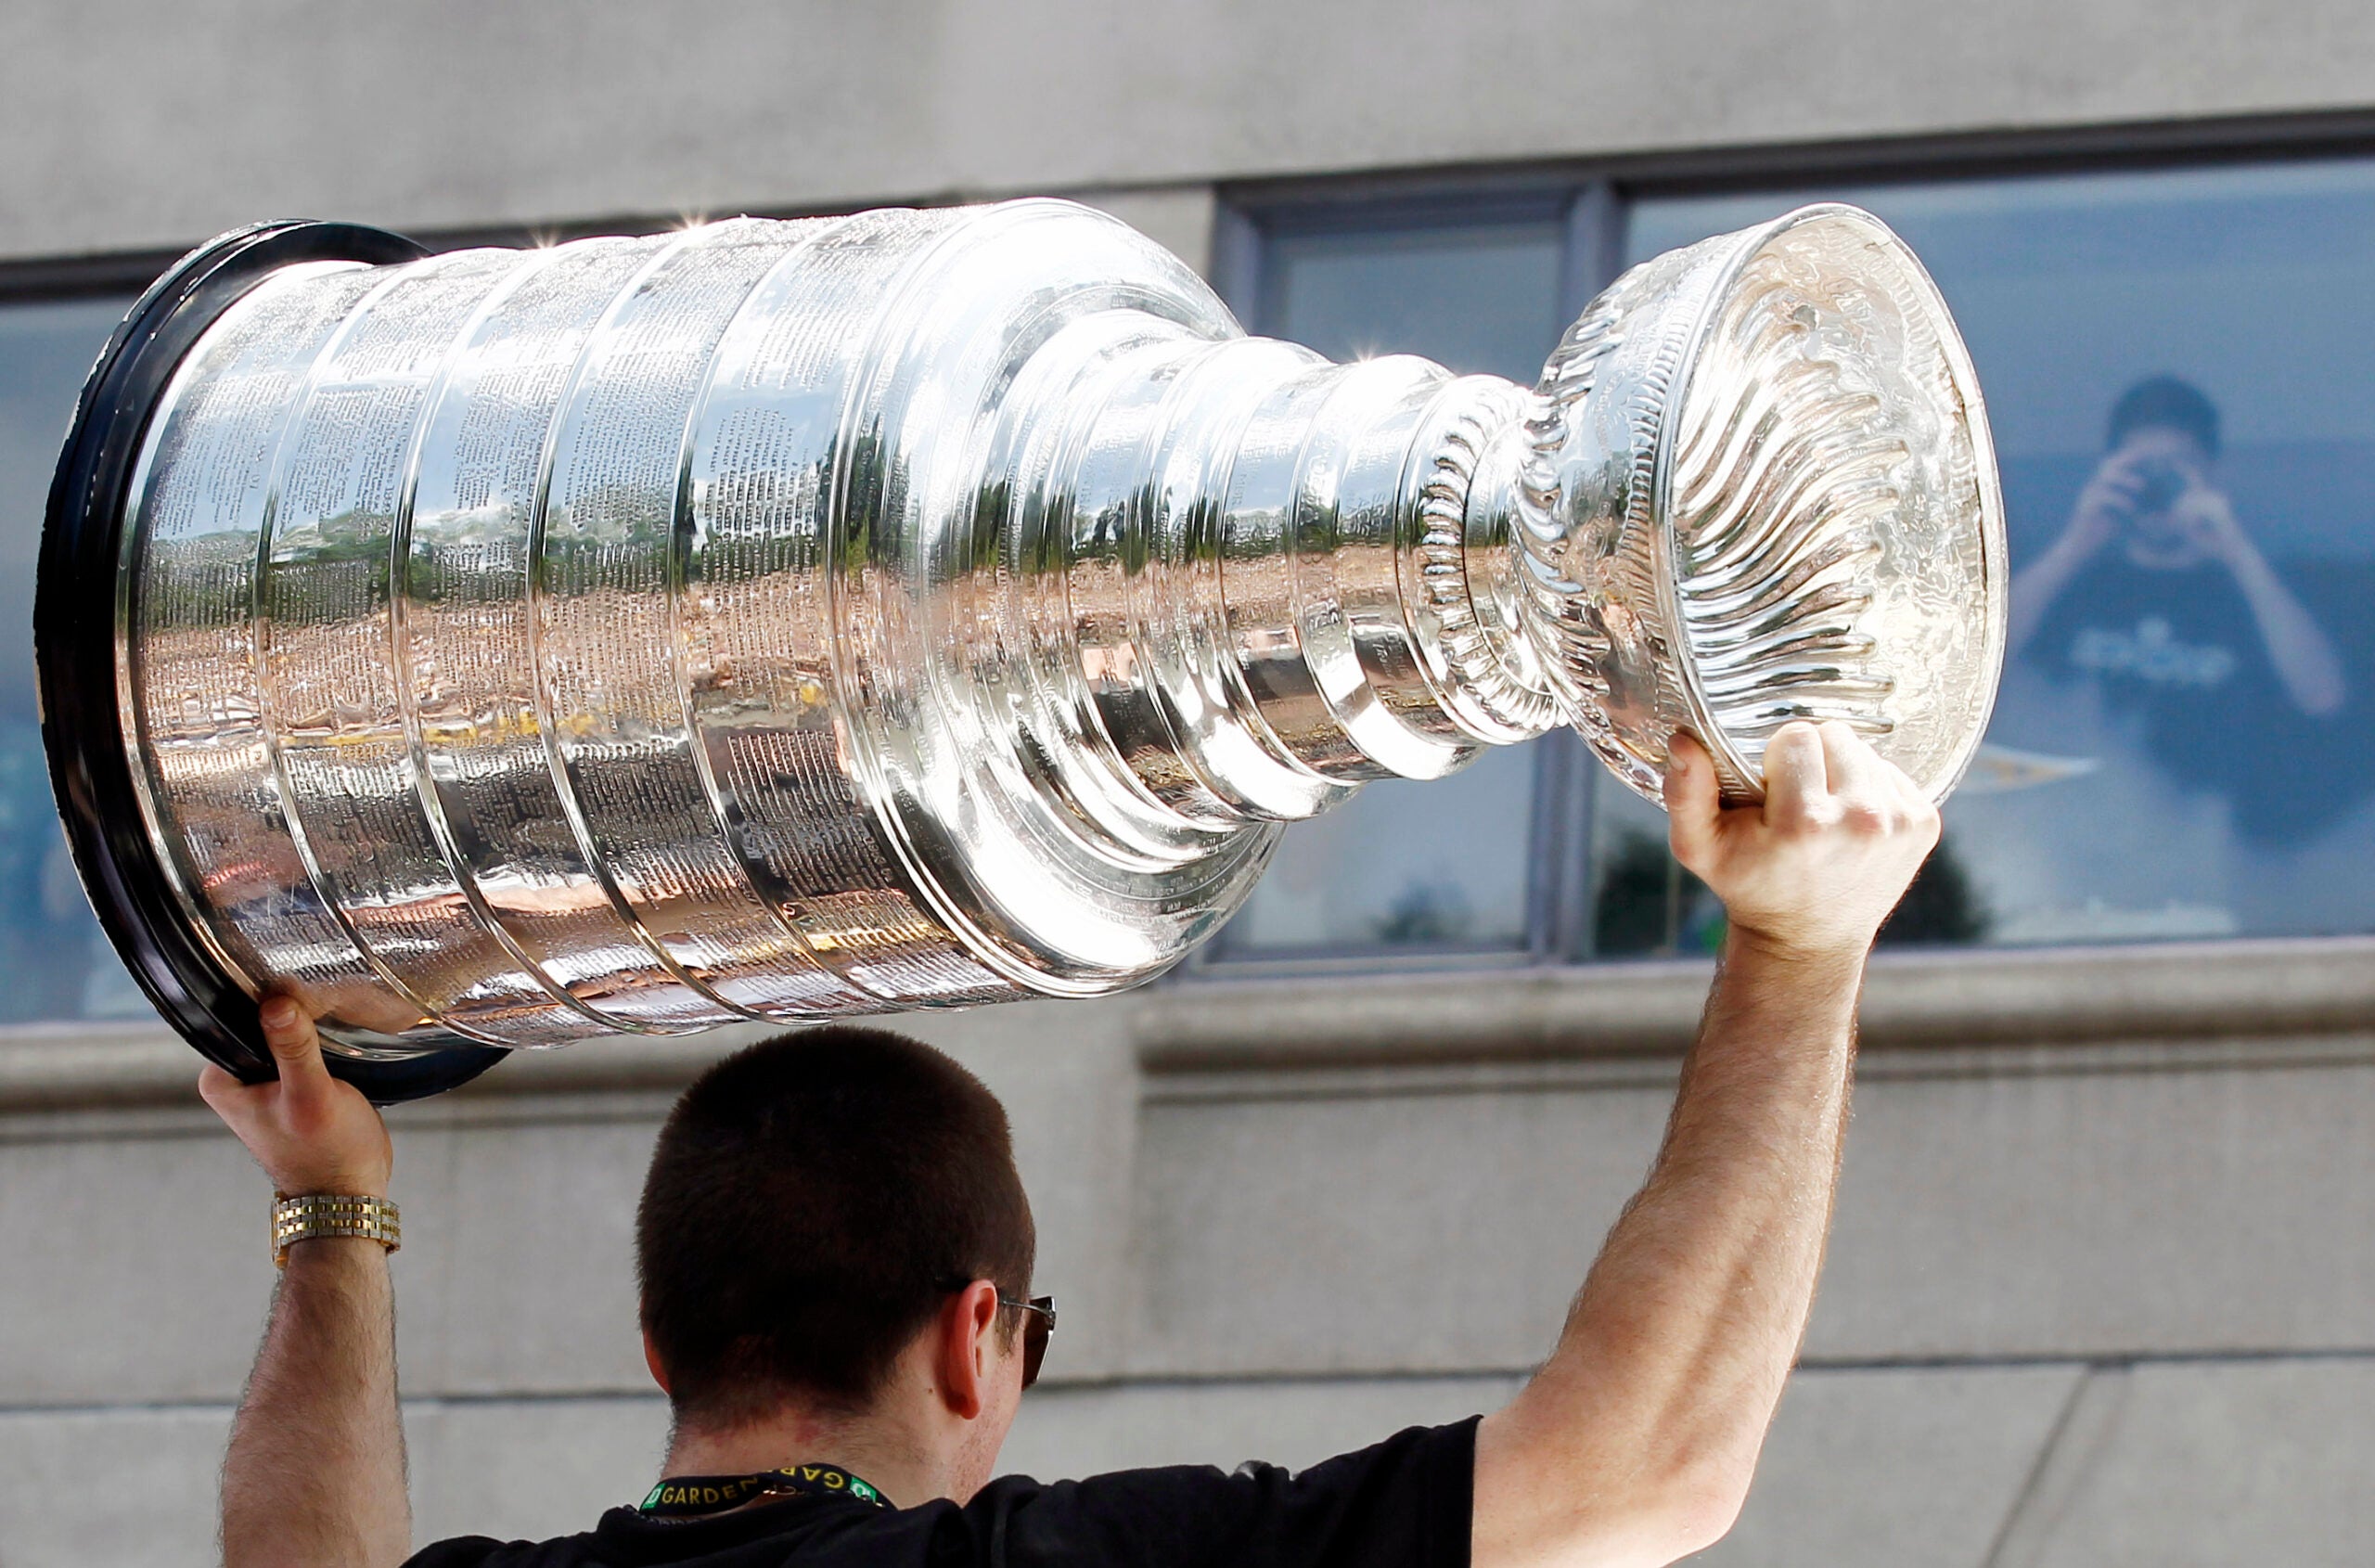 The Stanley Cup Comes to Visit, Accompanied by a Handler in White